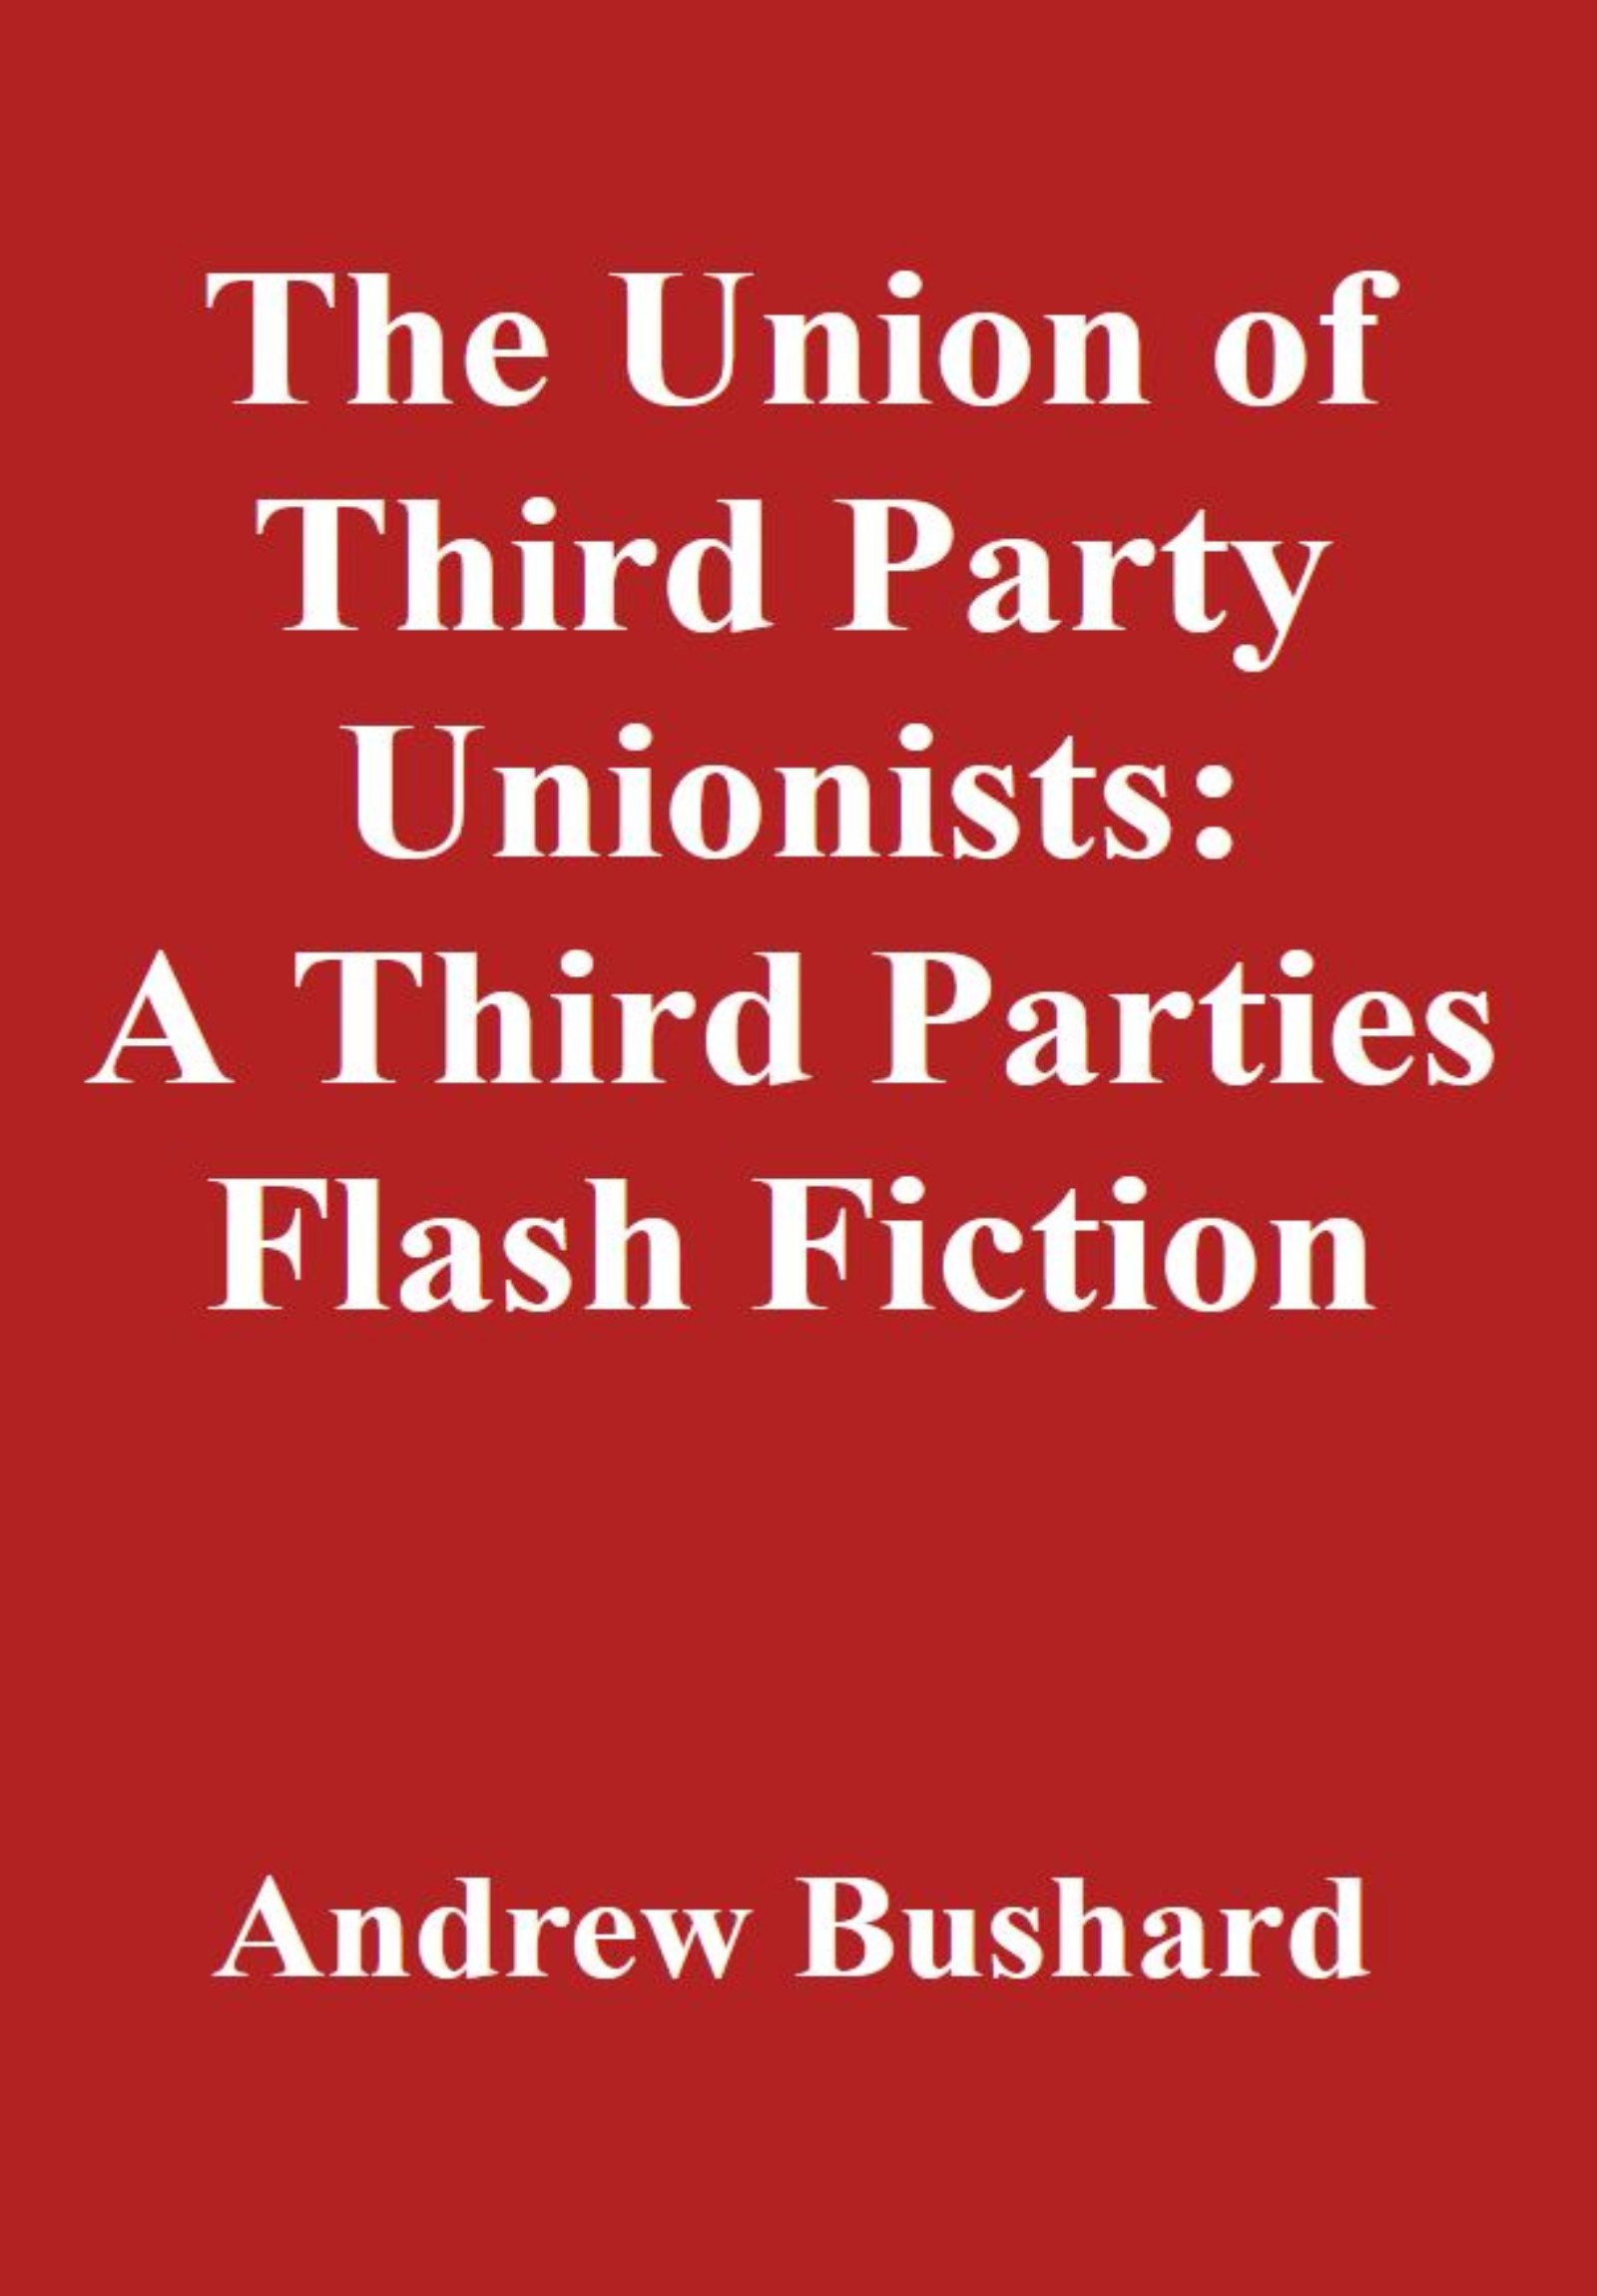 The Union of Third Party Unionists